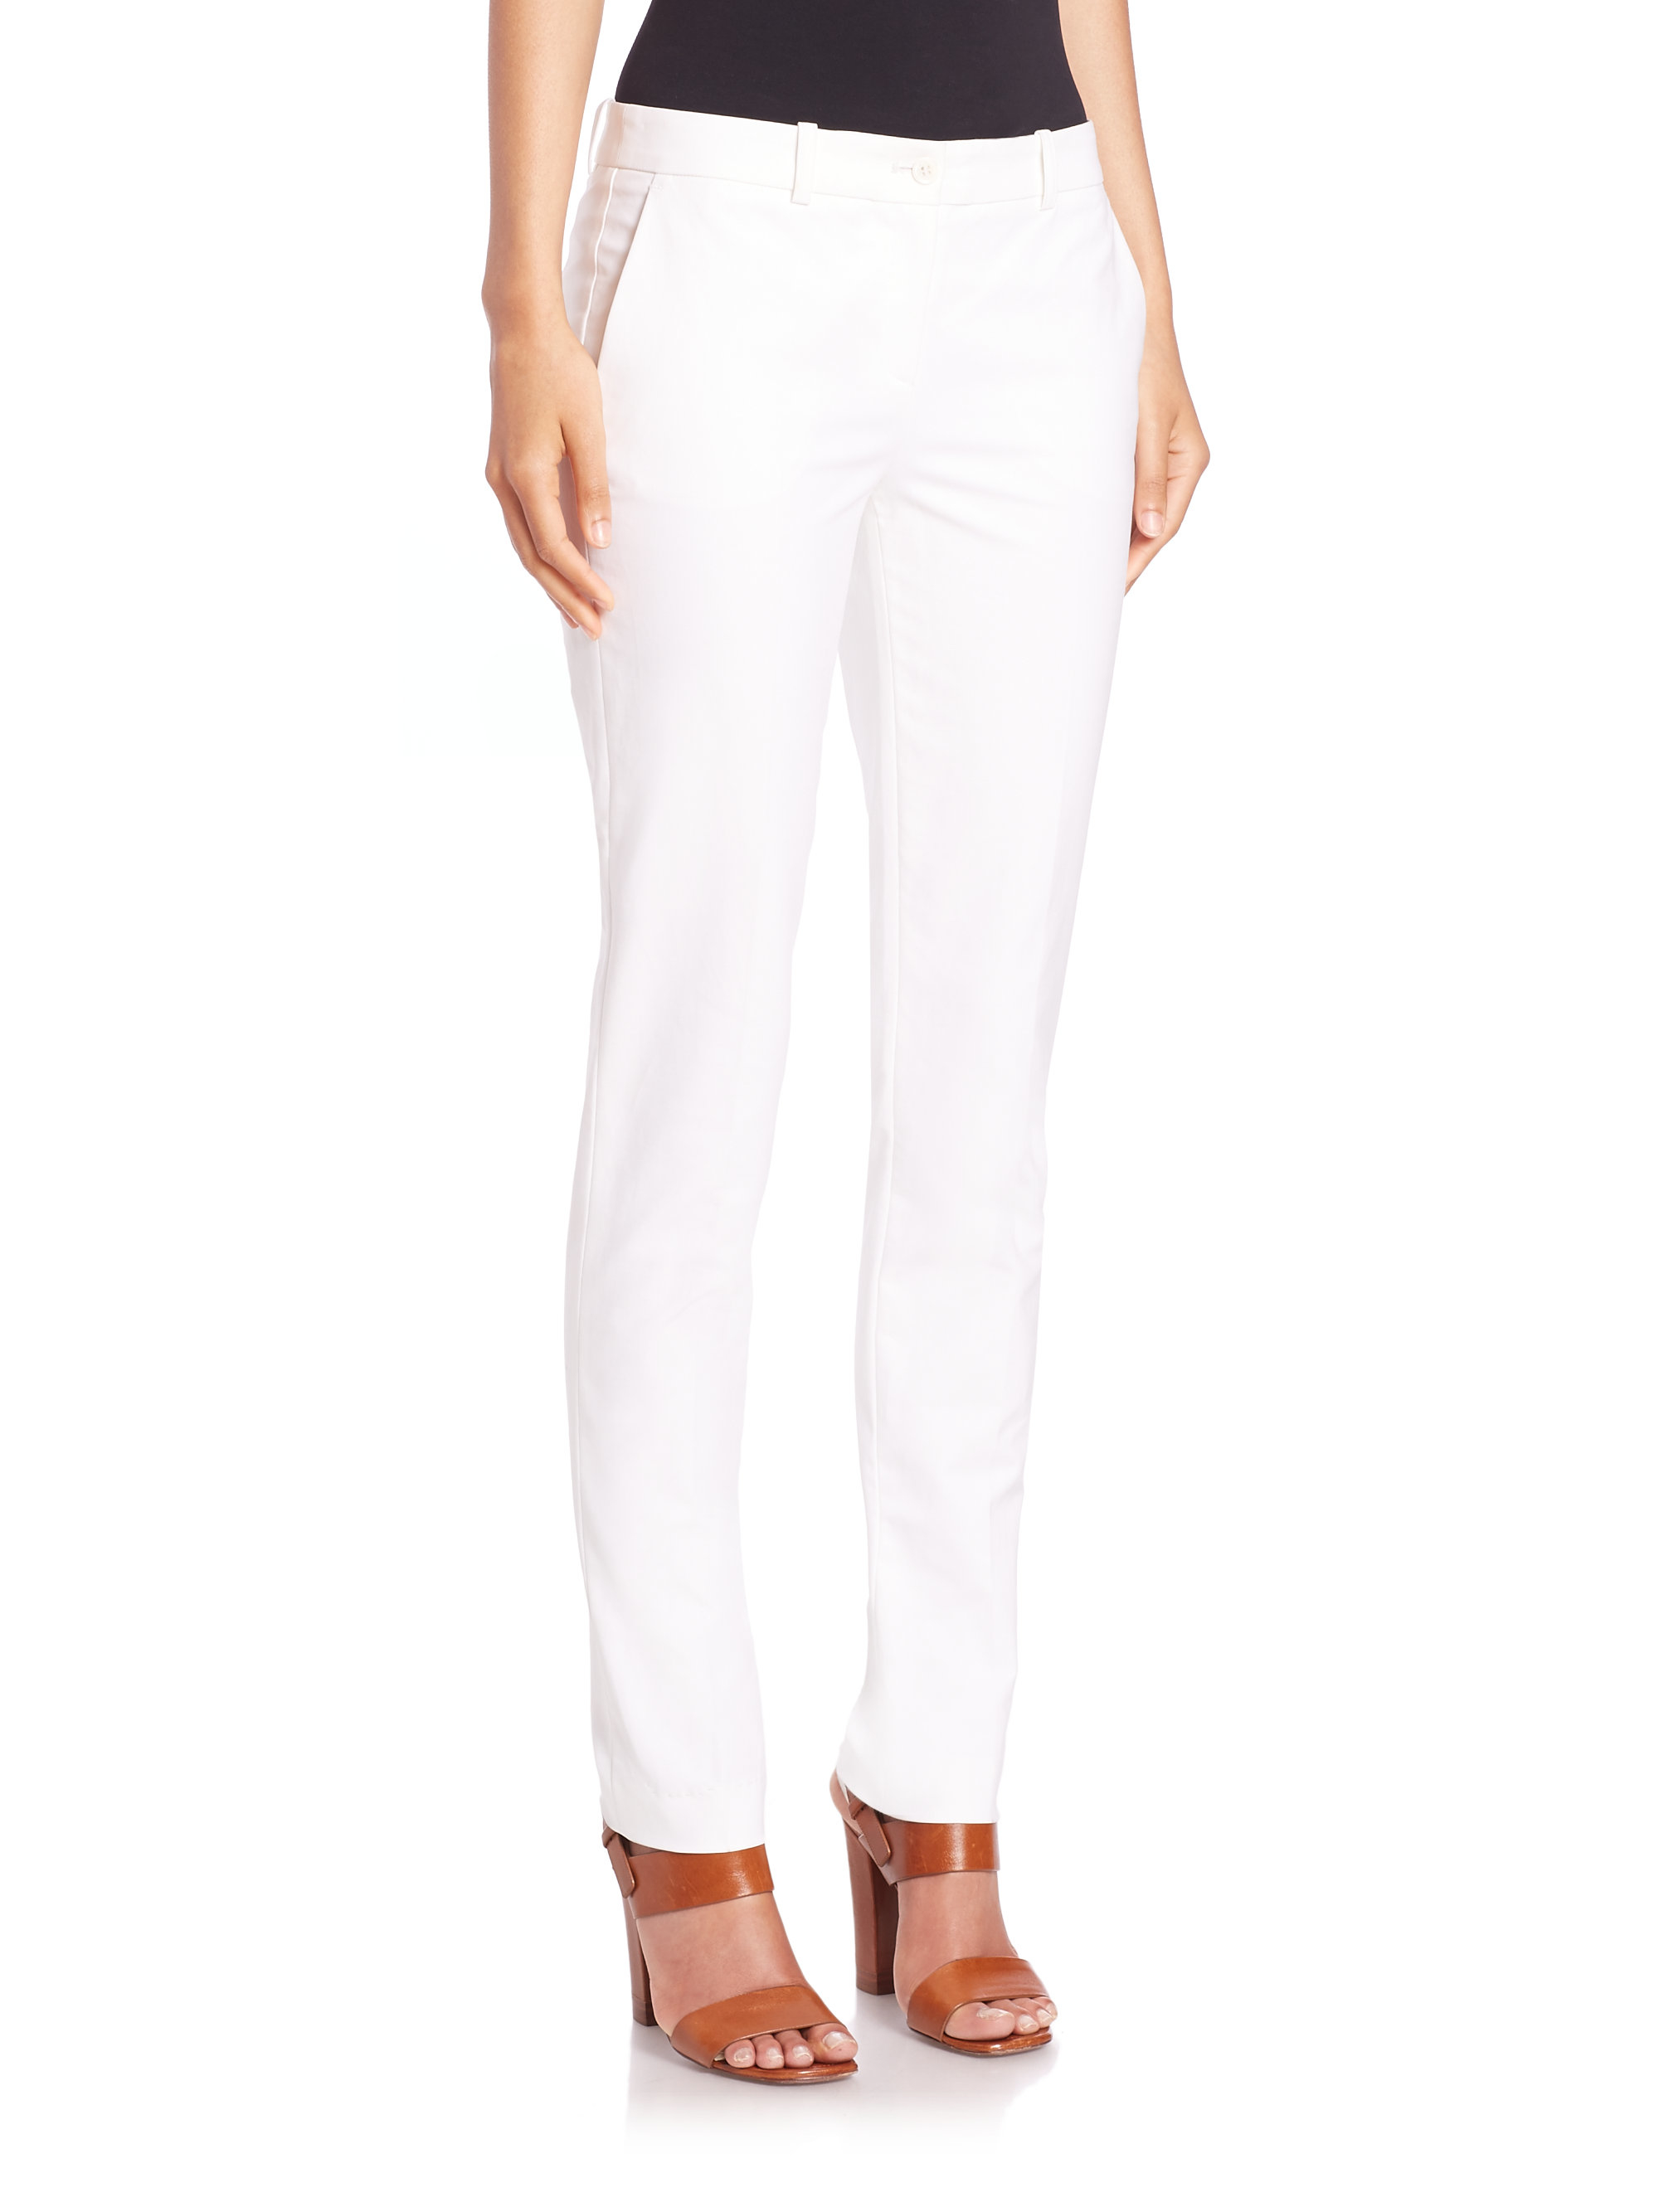 Lyst - Michael Kors Stretch-cotton Skinny Pants in White